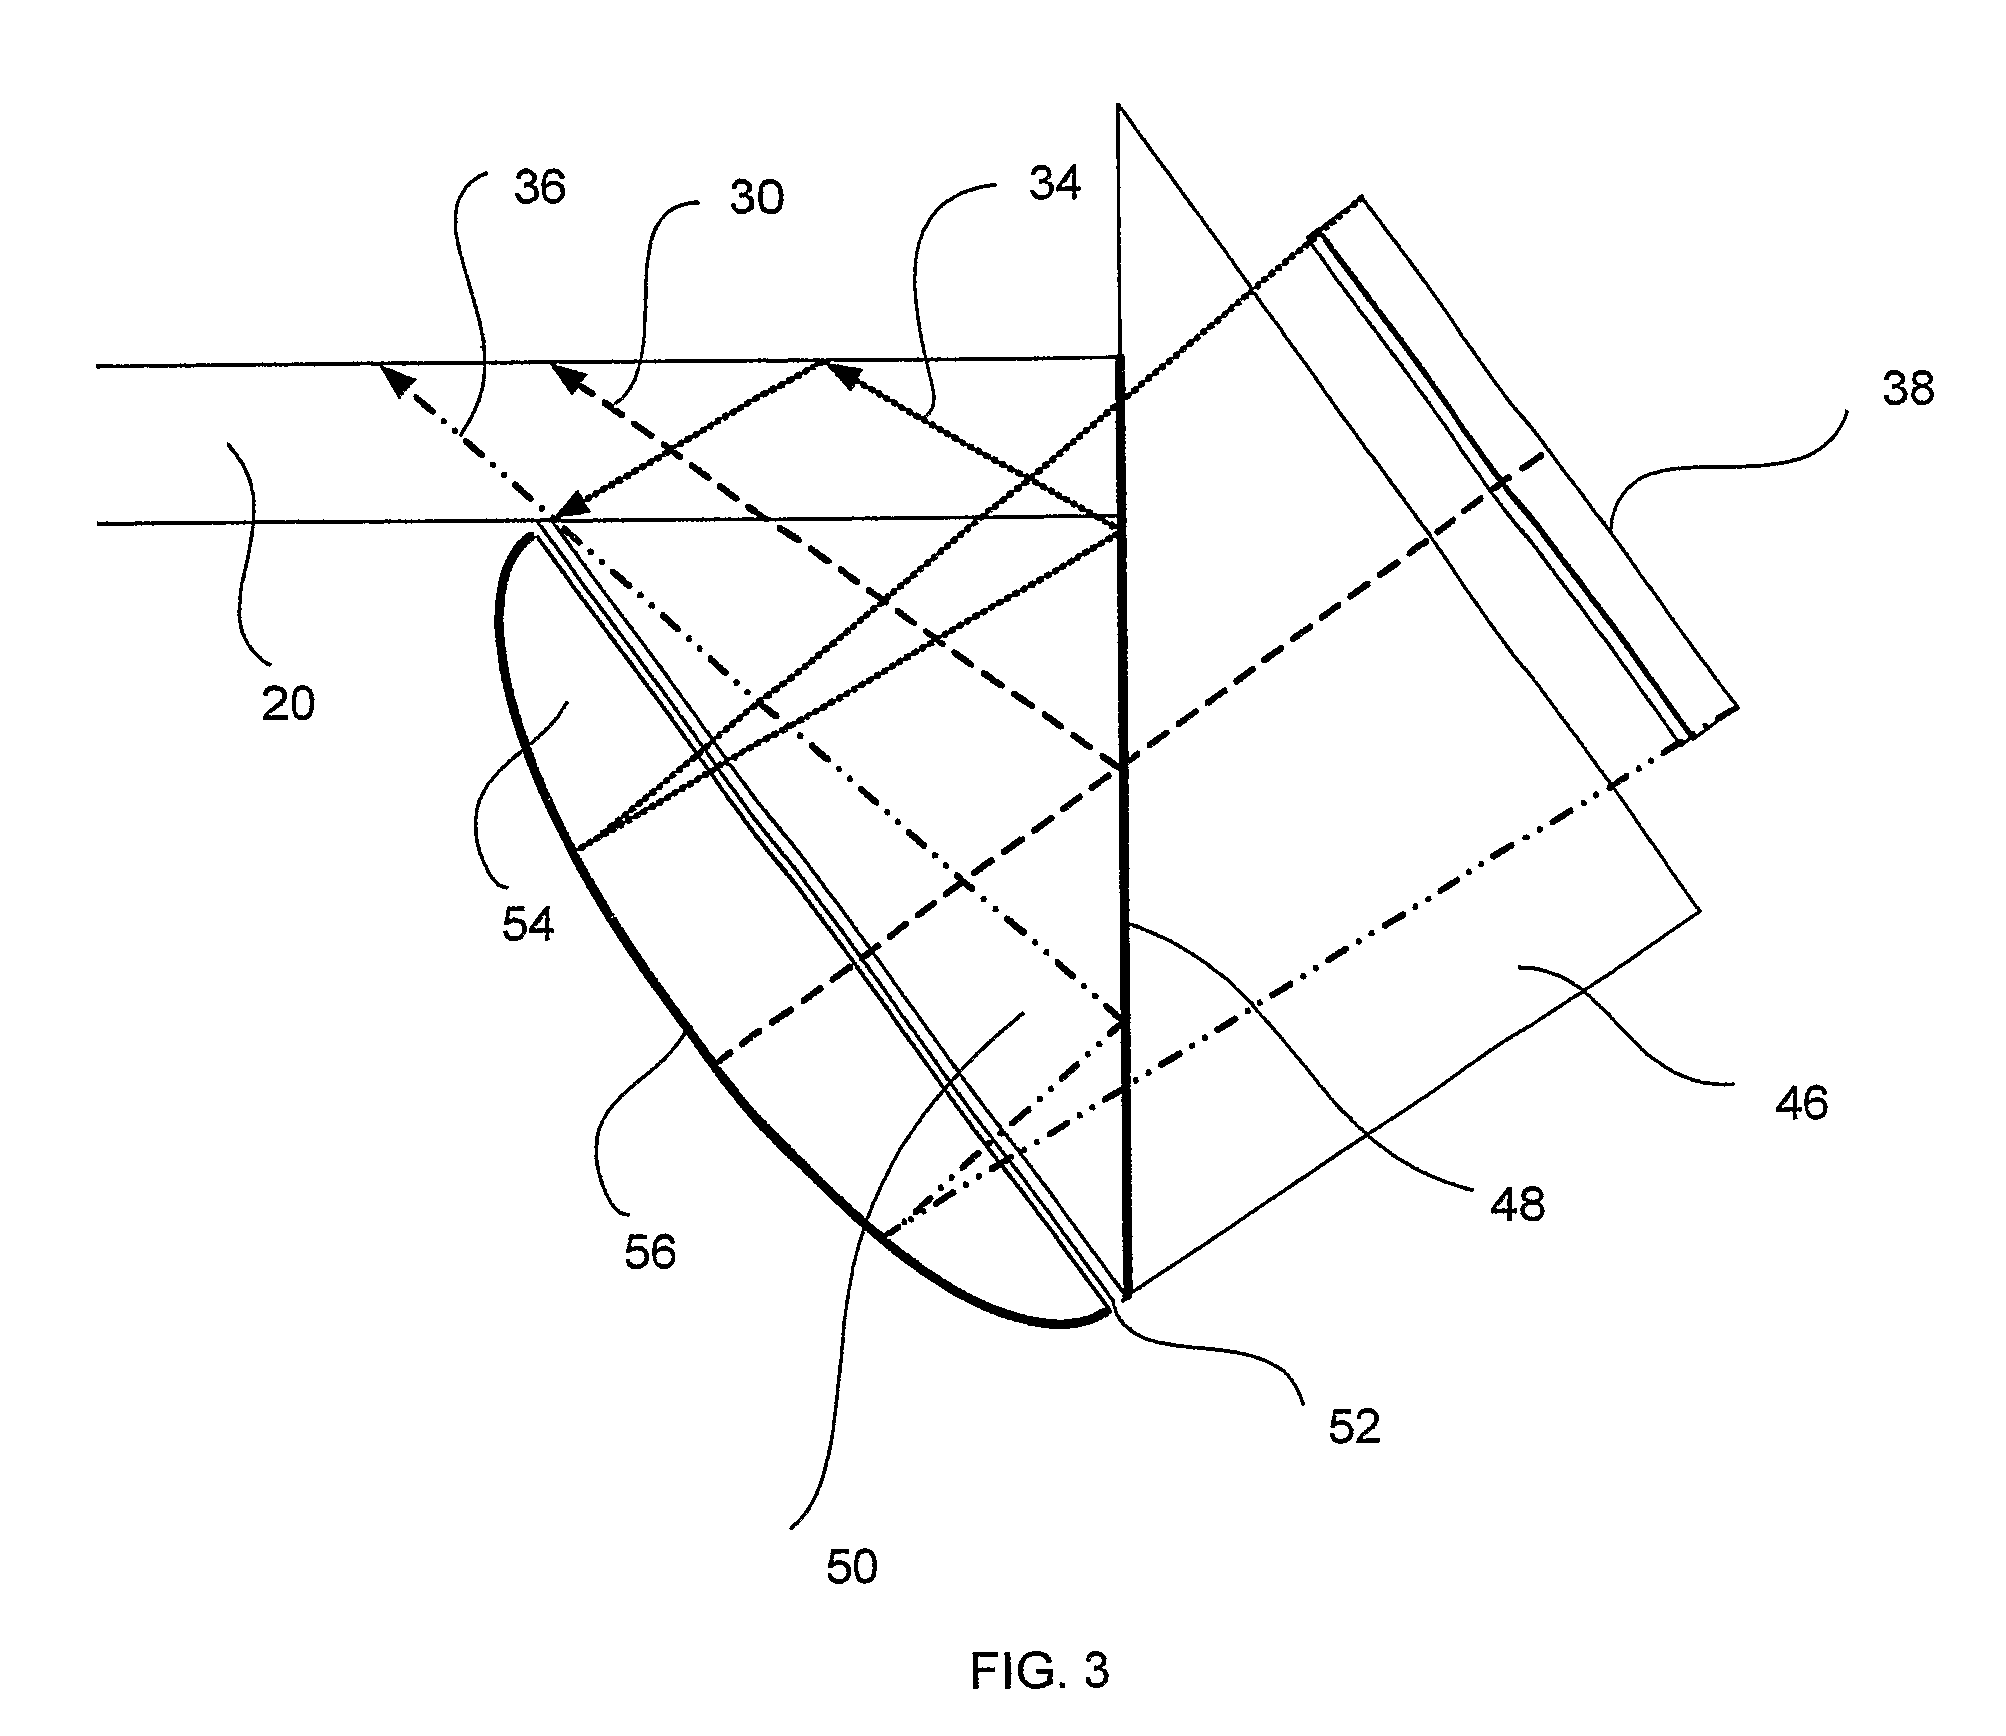 Optical device having a light transmitting substrate with external light coupling means